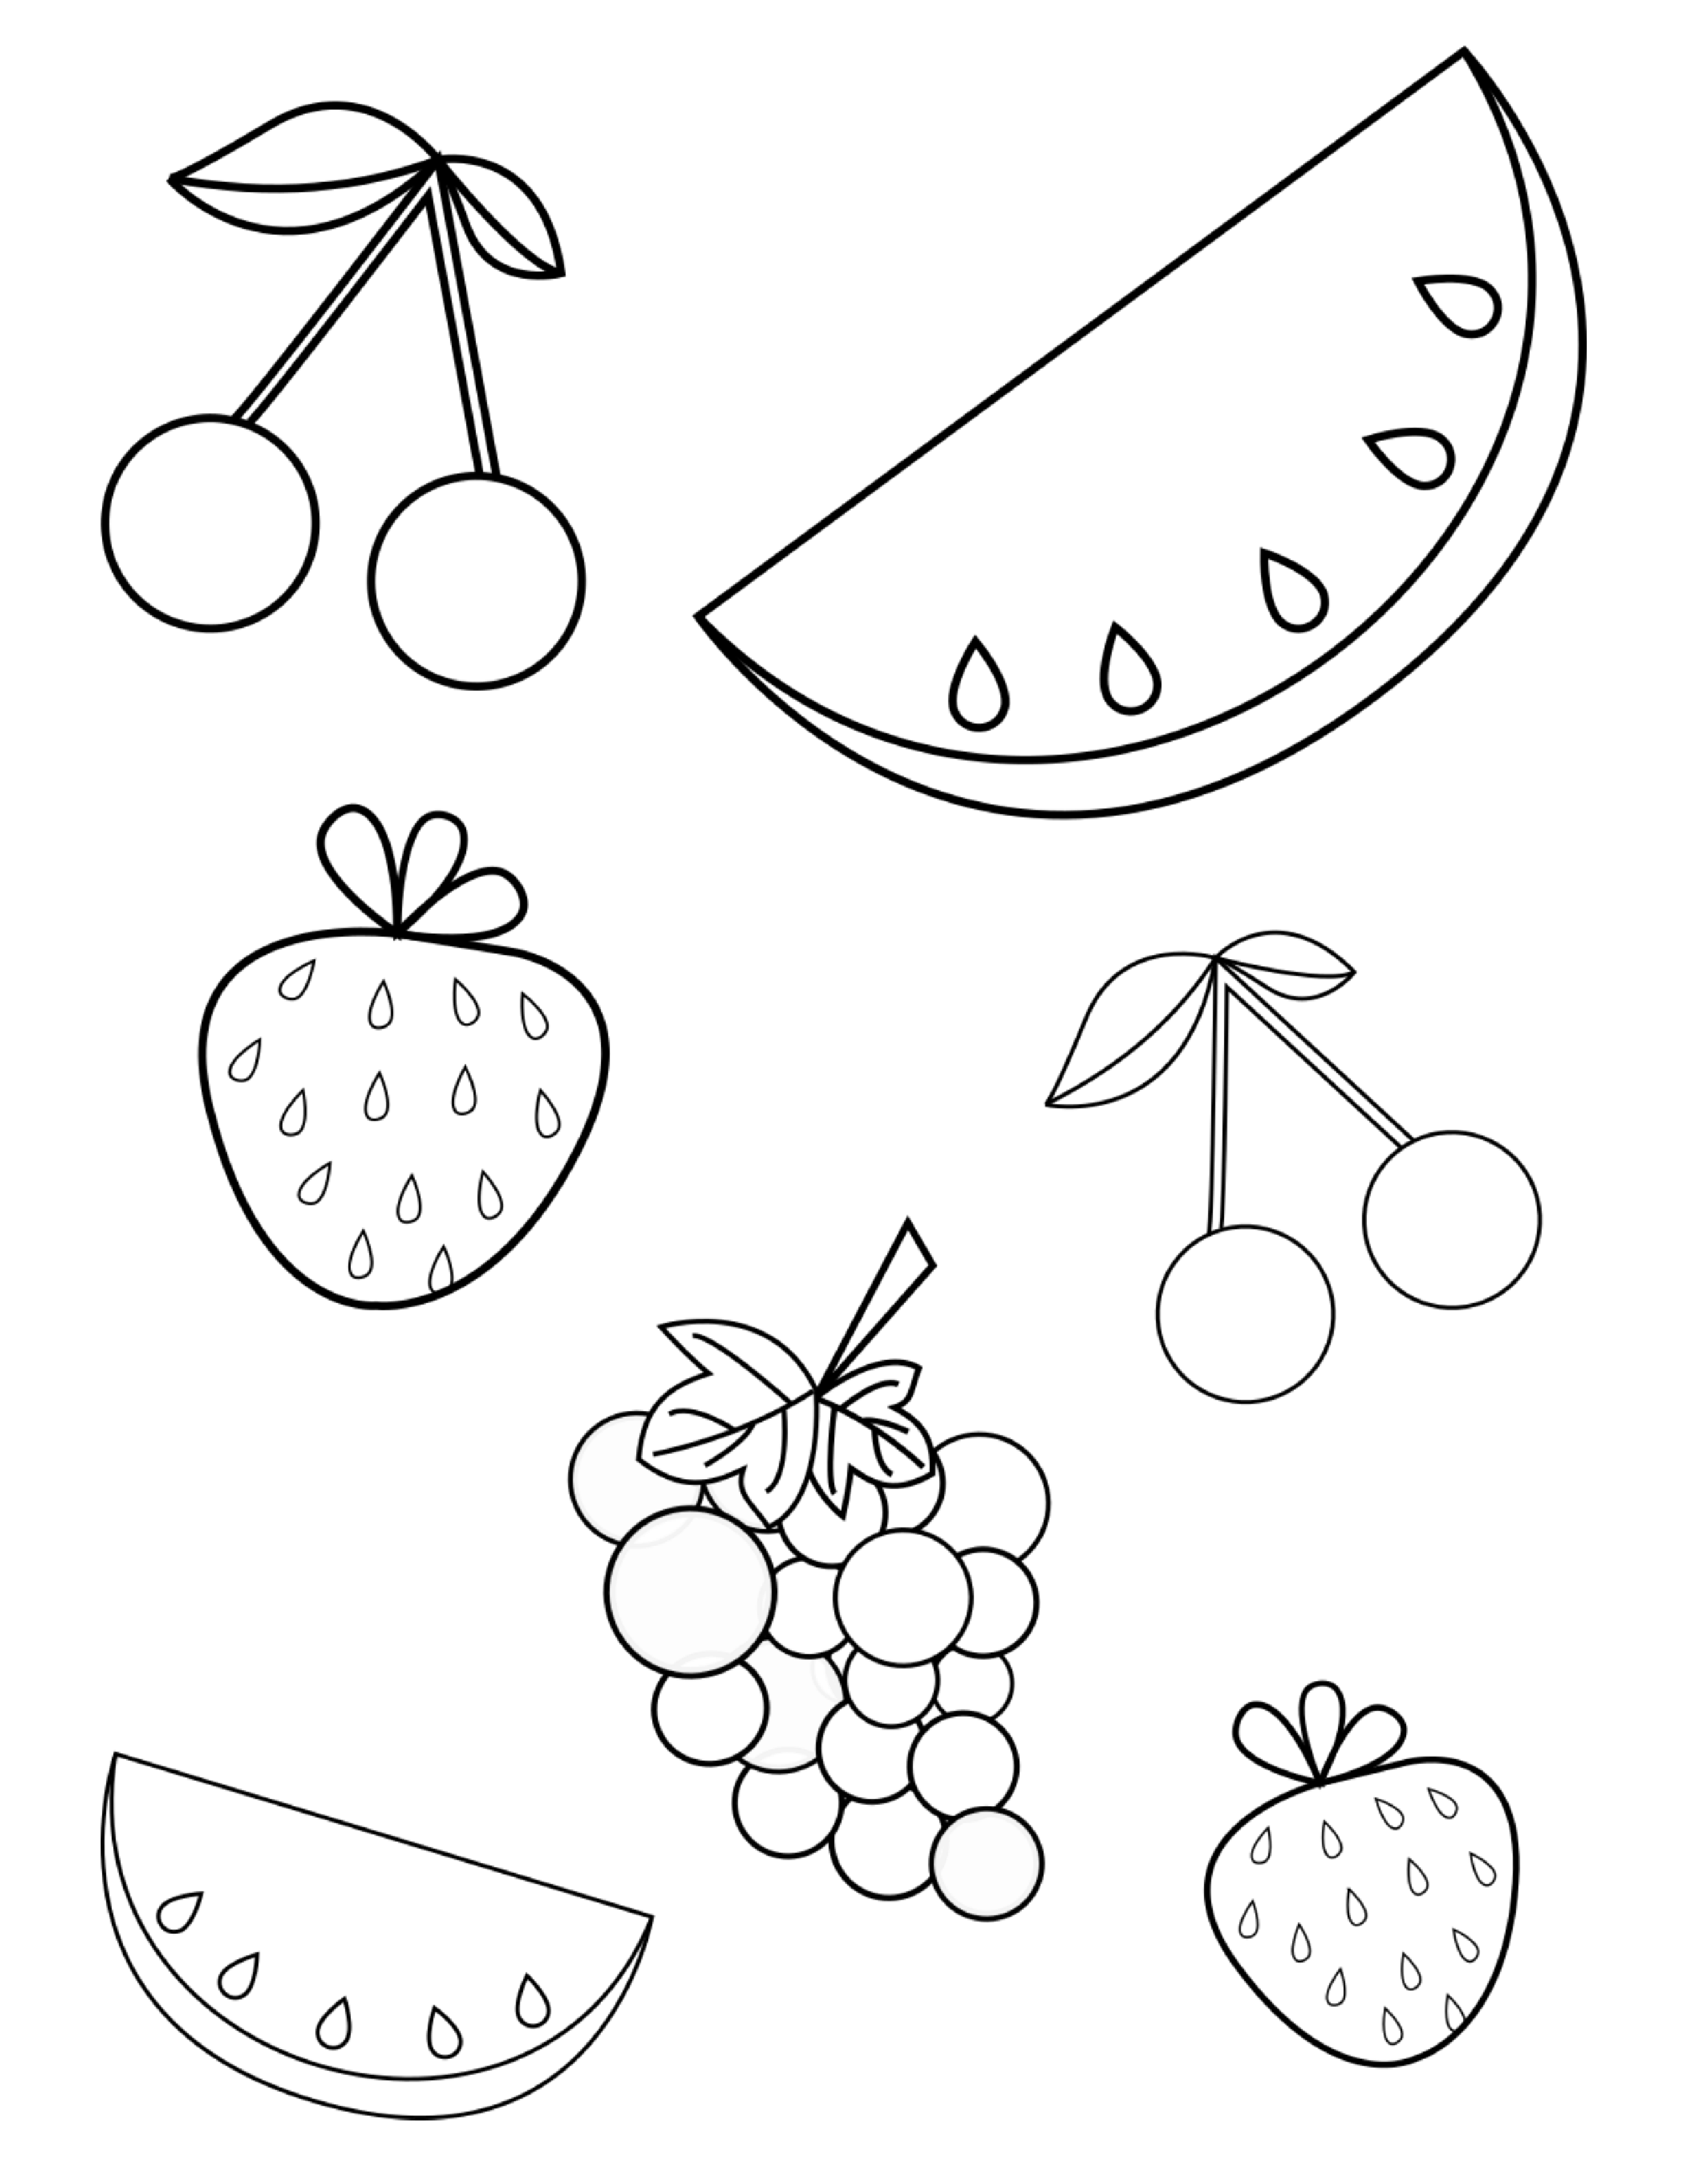 FREE Summer Fruits Coloring Page PDF for Toddlers & Preschoolers